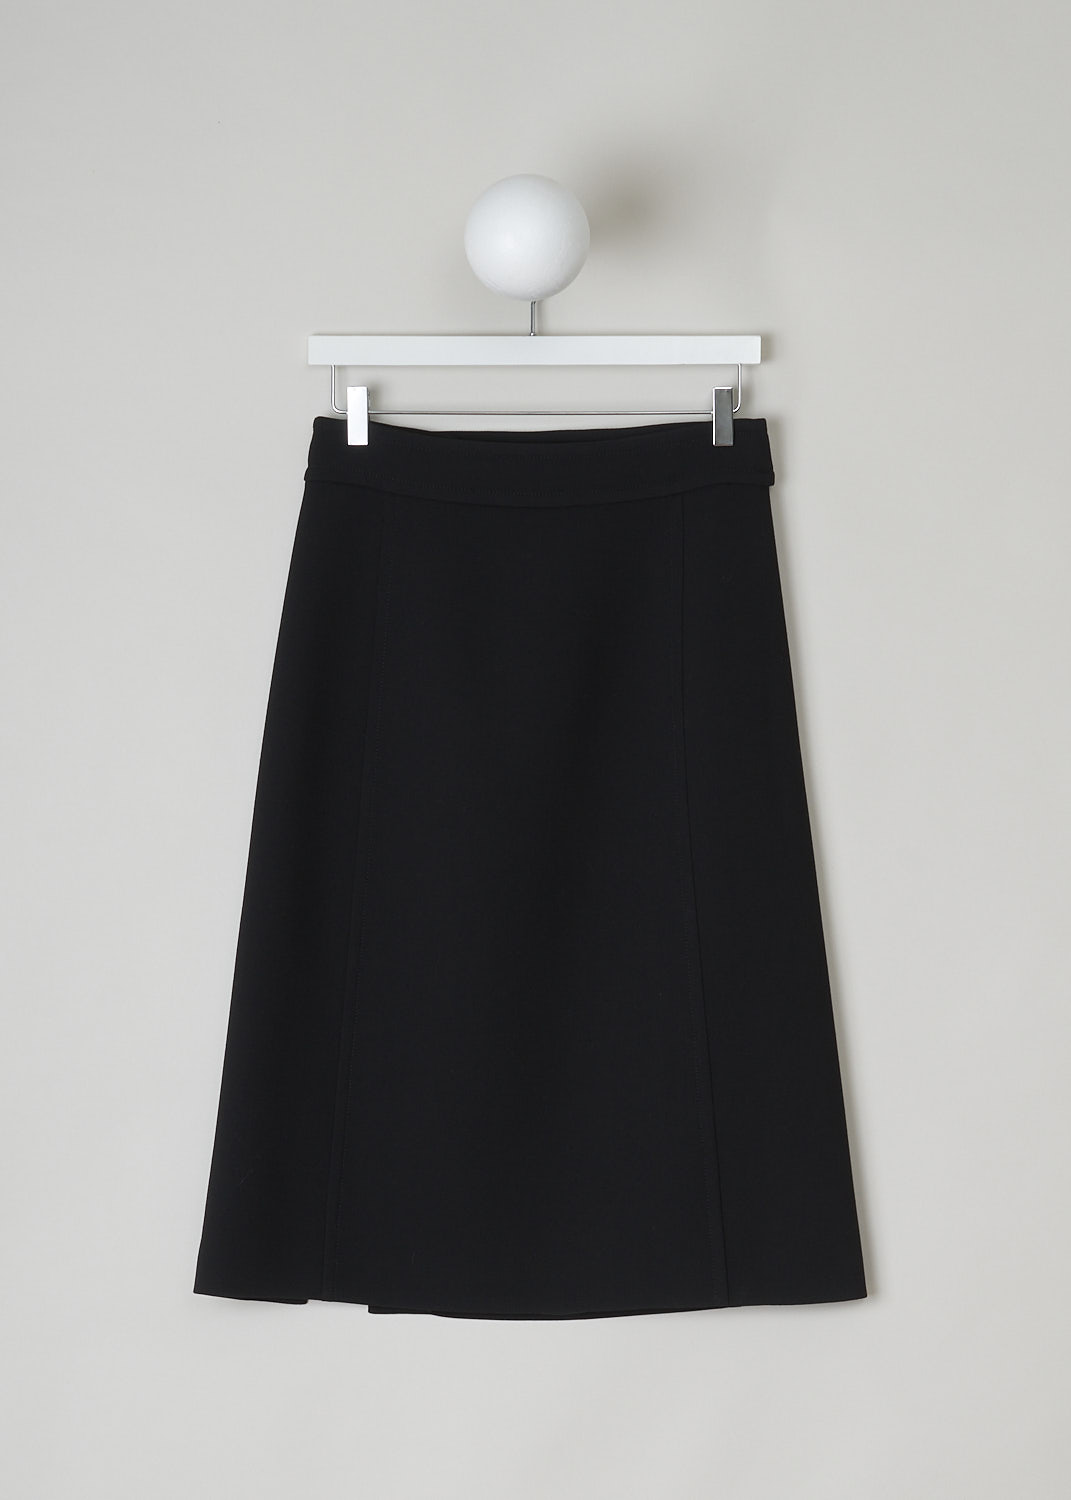 PRADA, BLACK A-LINE MIDI SKIRT, P113H_GUL_F0002_NATTE_GONNA_NERO, Black, Front, This black wool midi skirt has an A-line silhouette. In the back, on the broad waistband, the skirt has an incorporated belted detail with a big round fabric button. Also in the back, the skirt has a side slit and a concealed zipper that functions as the closure option. The skirt is fully lined. 

